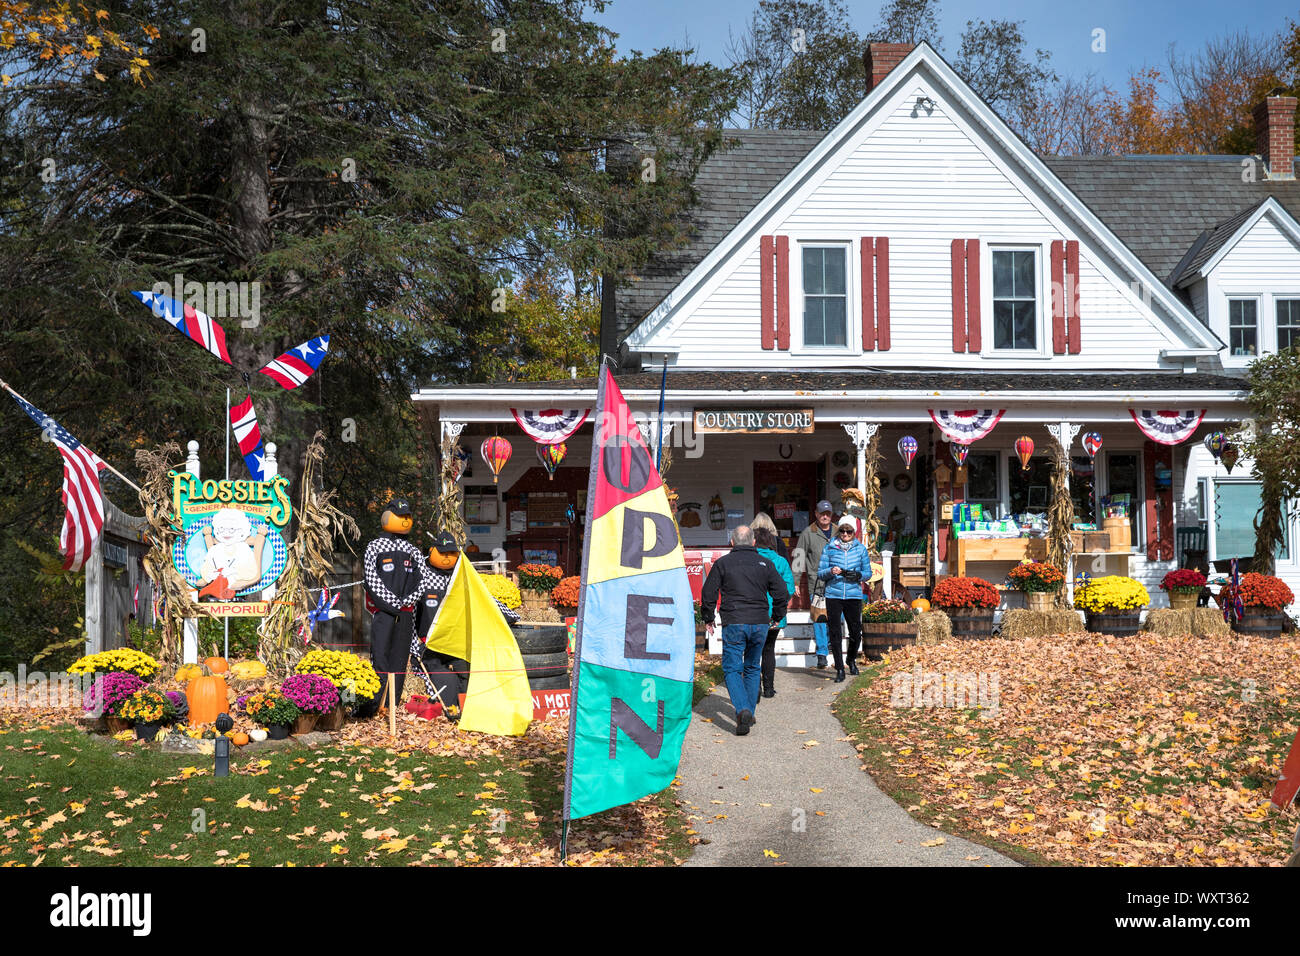 Traditional country store - Flossie's General Store and Emporium at Halloween time, Jackson in New Hampshire, USA Stock Photo